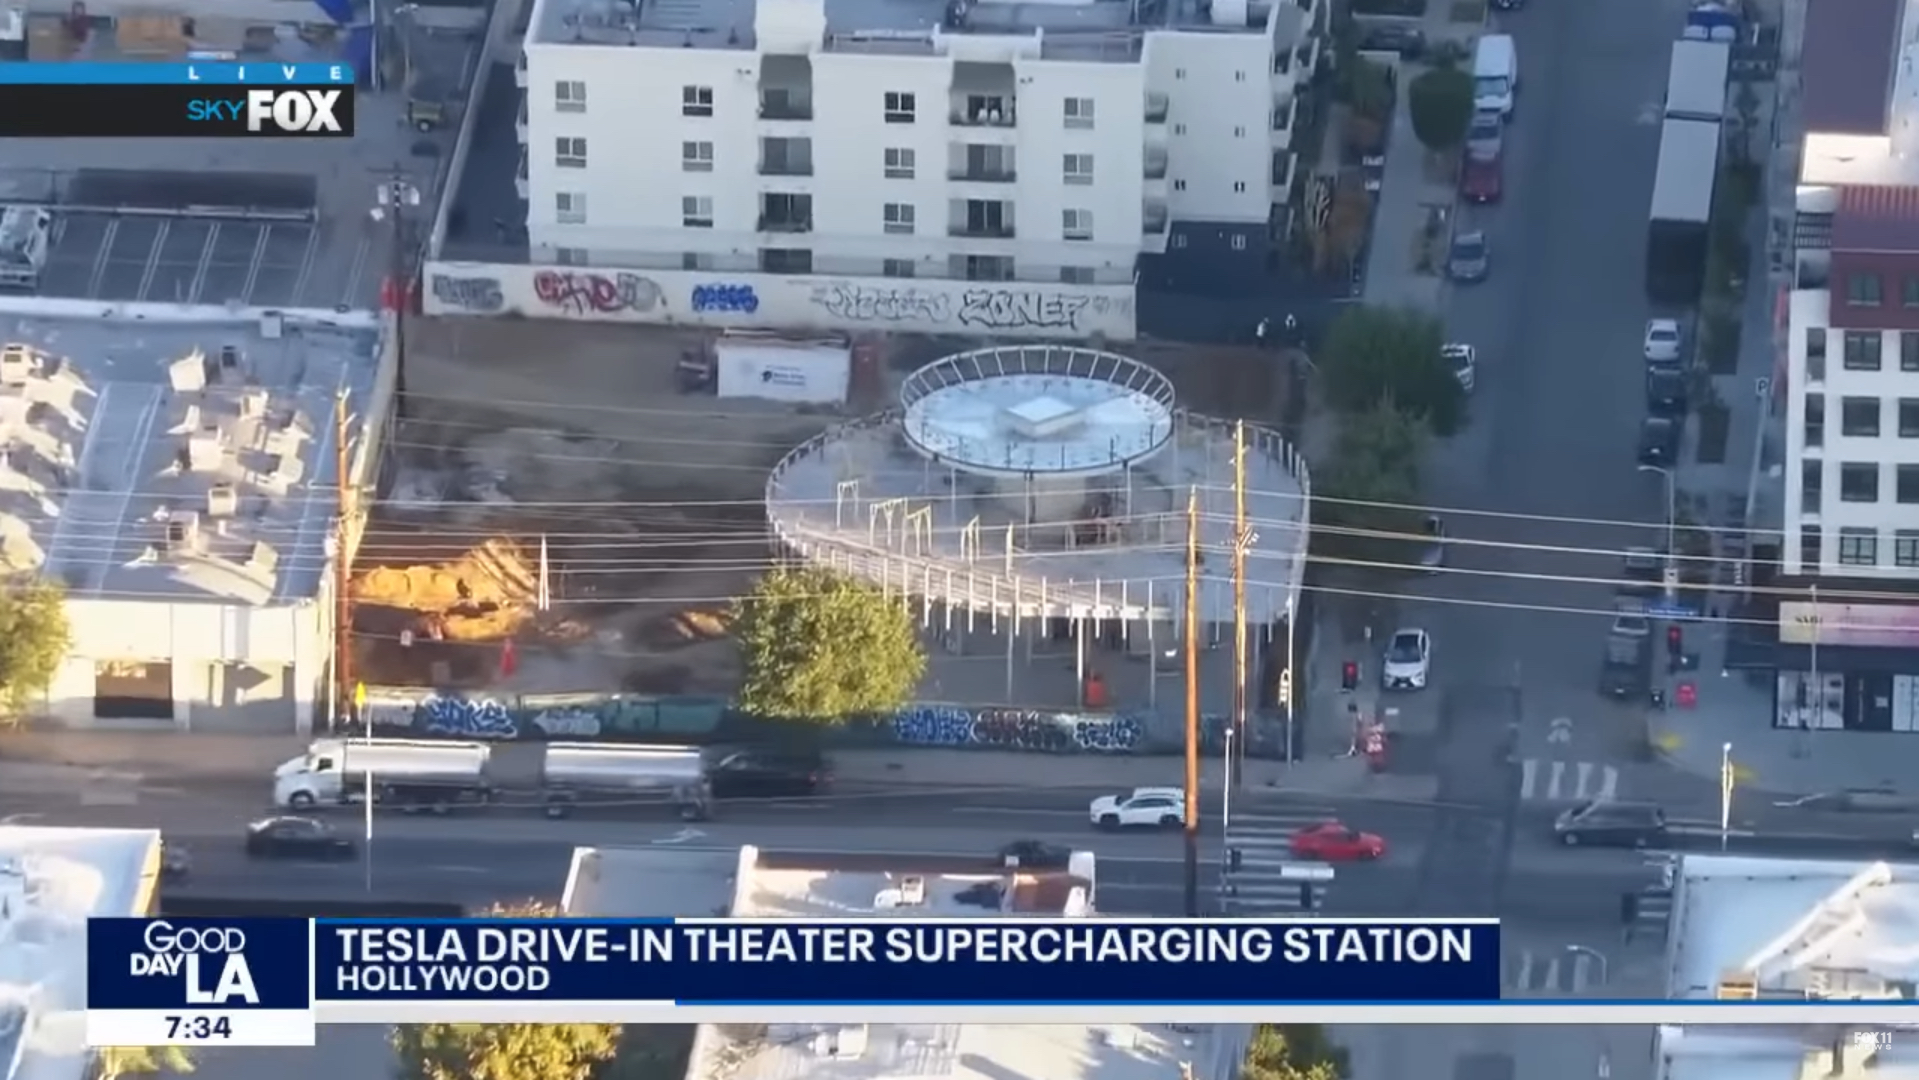 tesla-drive-in-theater-diner-supercharger-los-angeles-aerial-footage